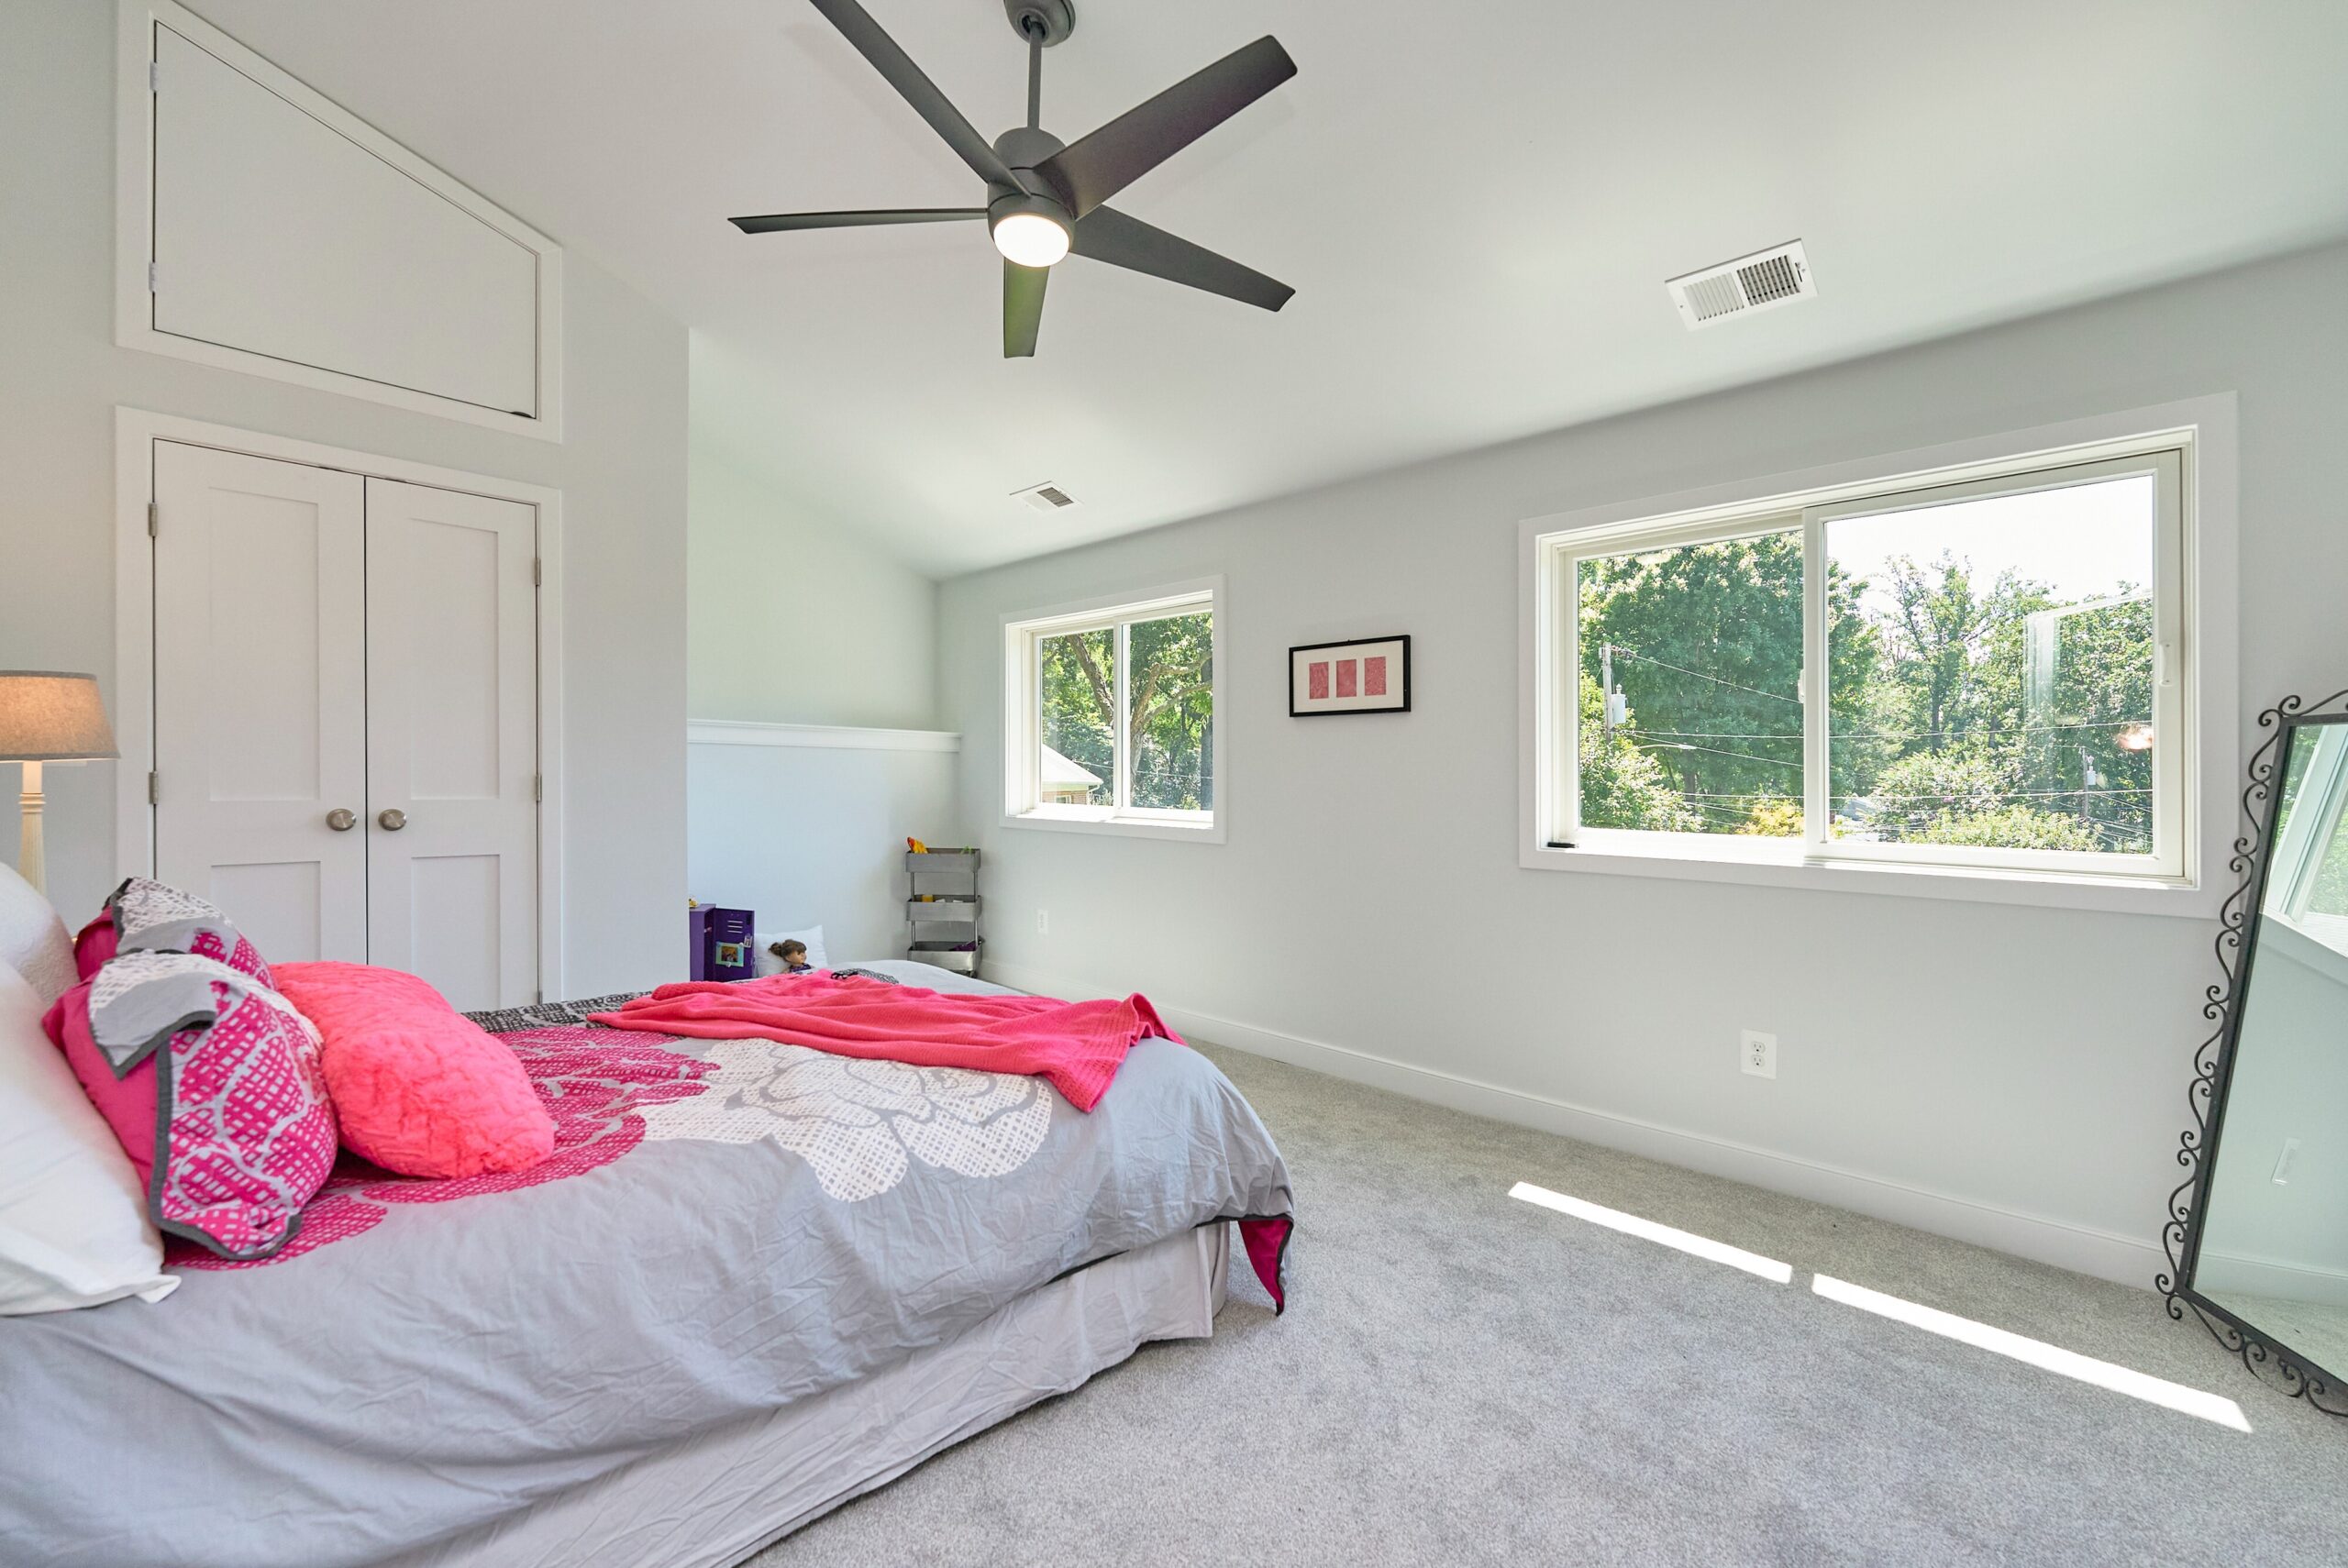 Professional photo of interior of custom home in Falls Church, Virginia. Shows a bedroom with a high angled, vaulted ceiling, ceiling fan, and nook.